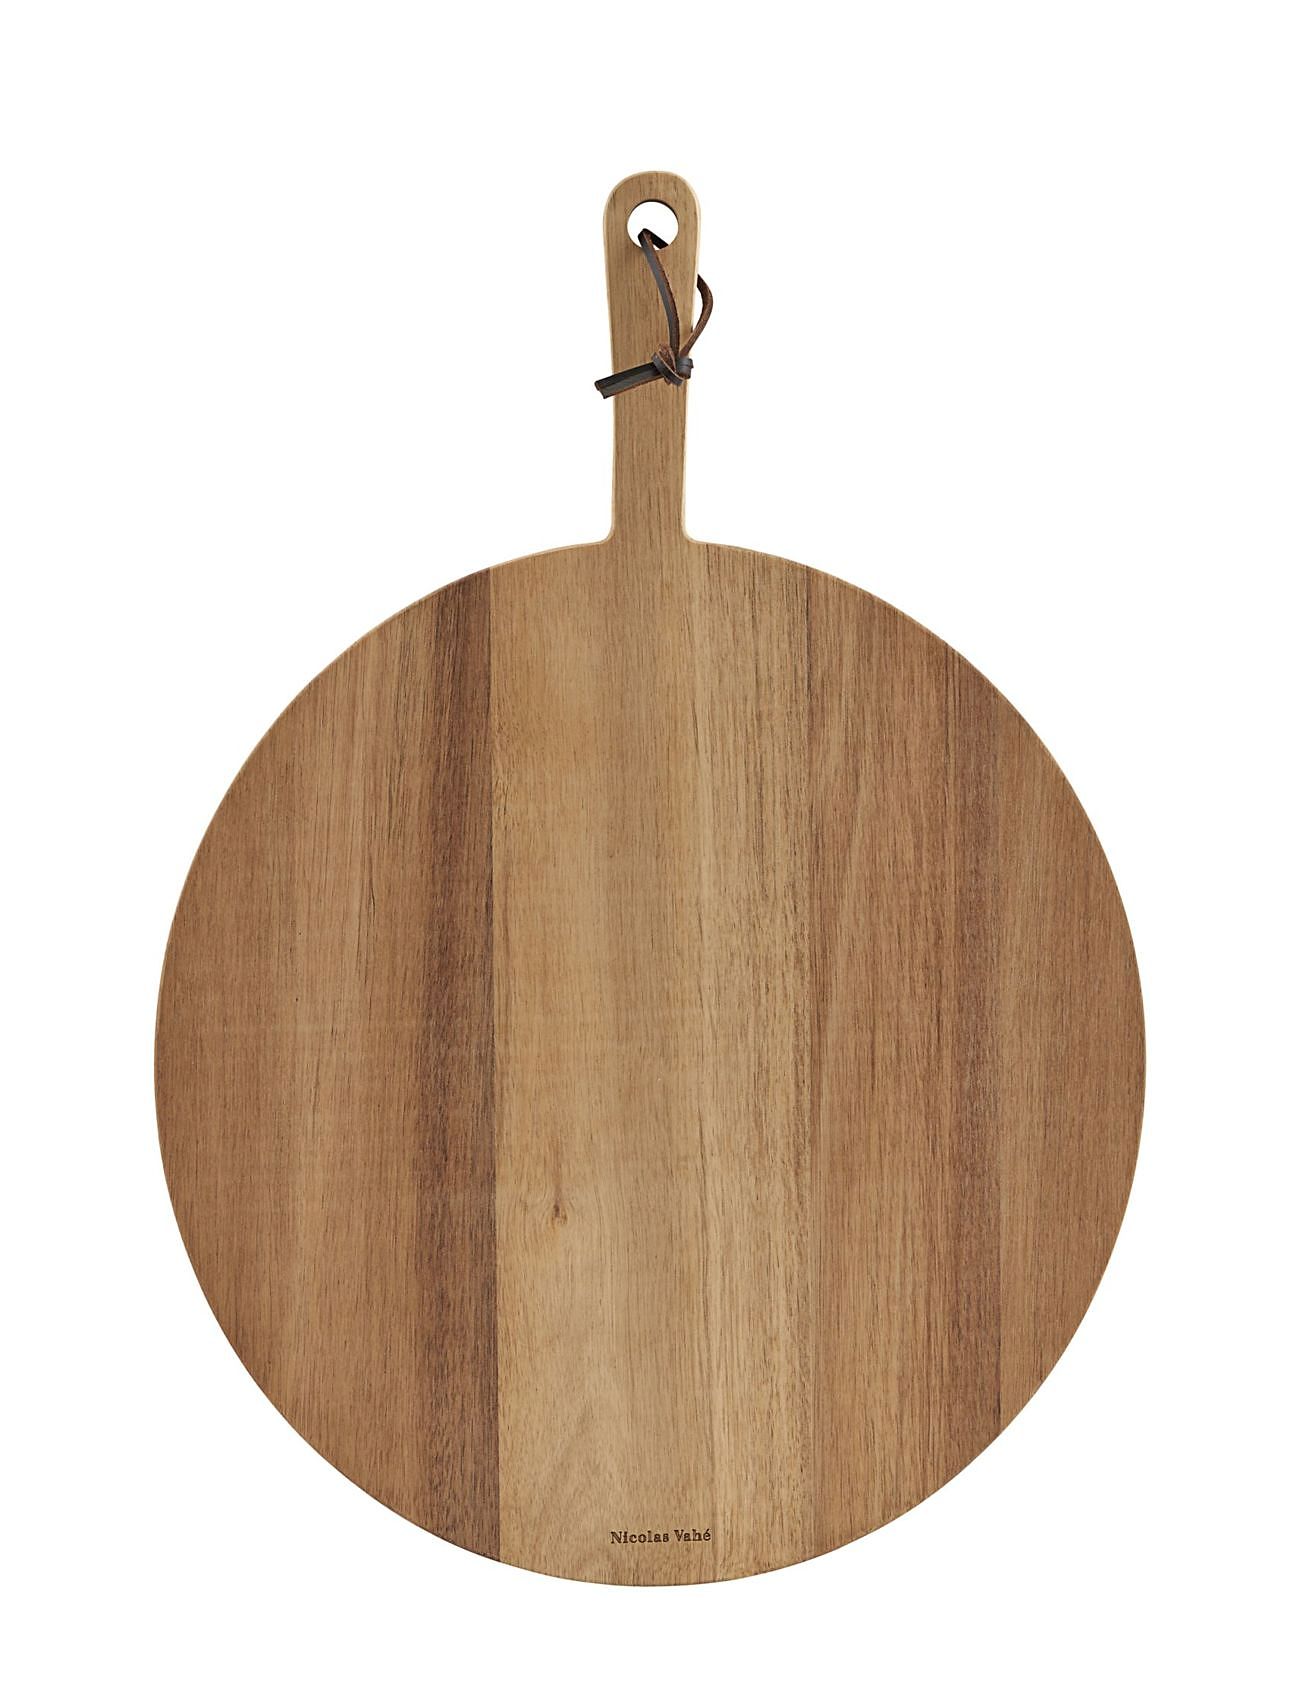 Cutting Board, Pizza, Nature Home Kitchen Kitchen Tools Cutting Boards Wooden Cutting Boards Nicolas Vahé